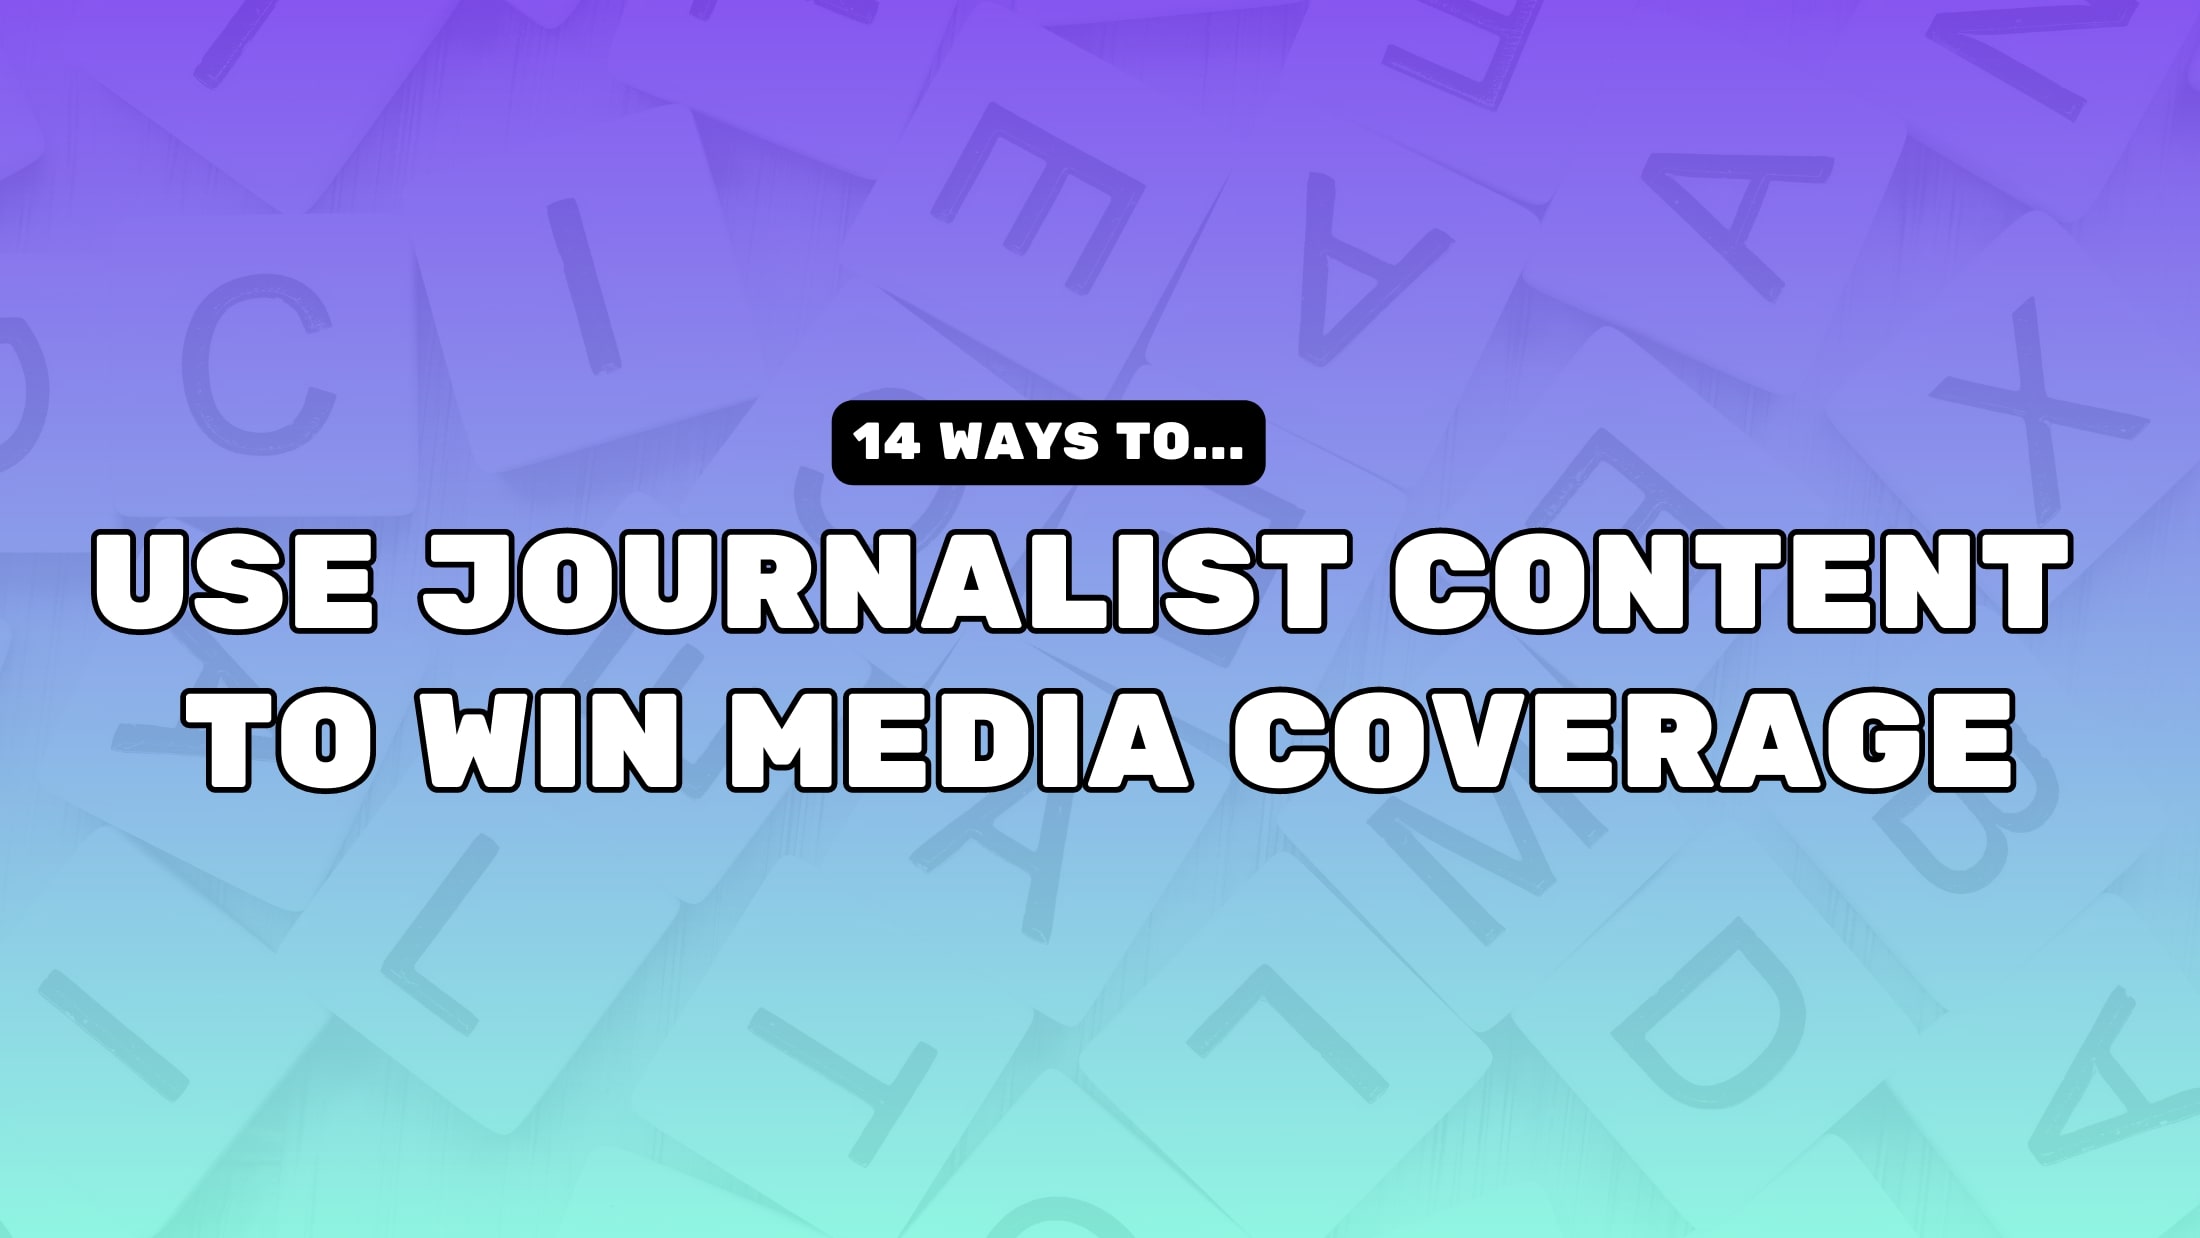 14 Ways Of Using Journalist Content To Win Media Coverage